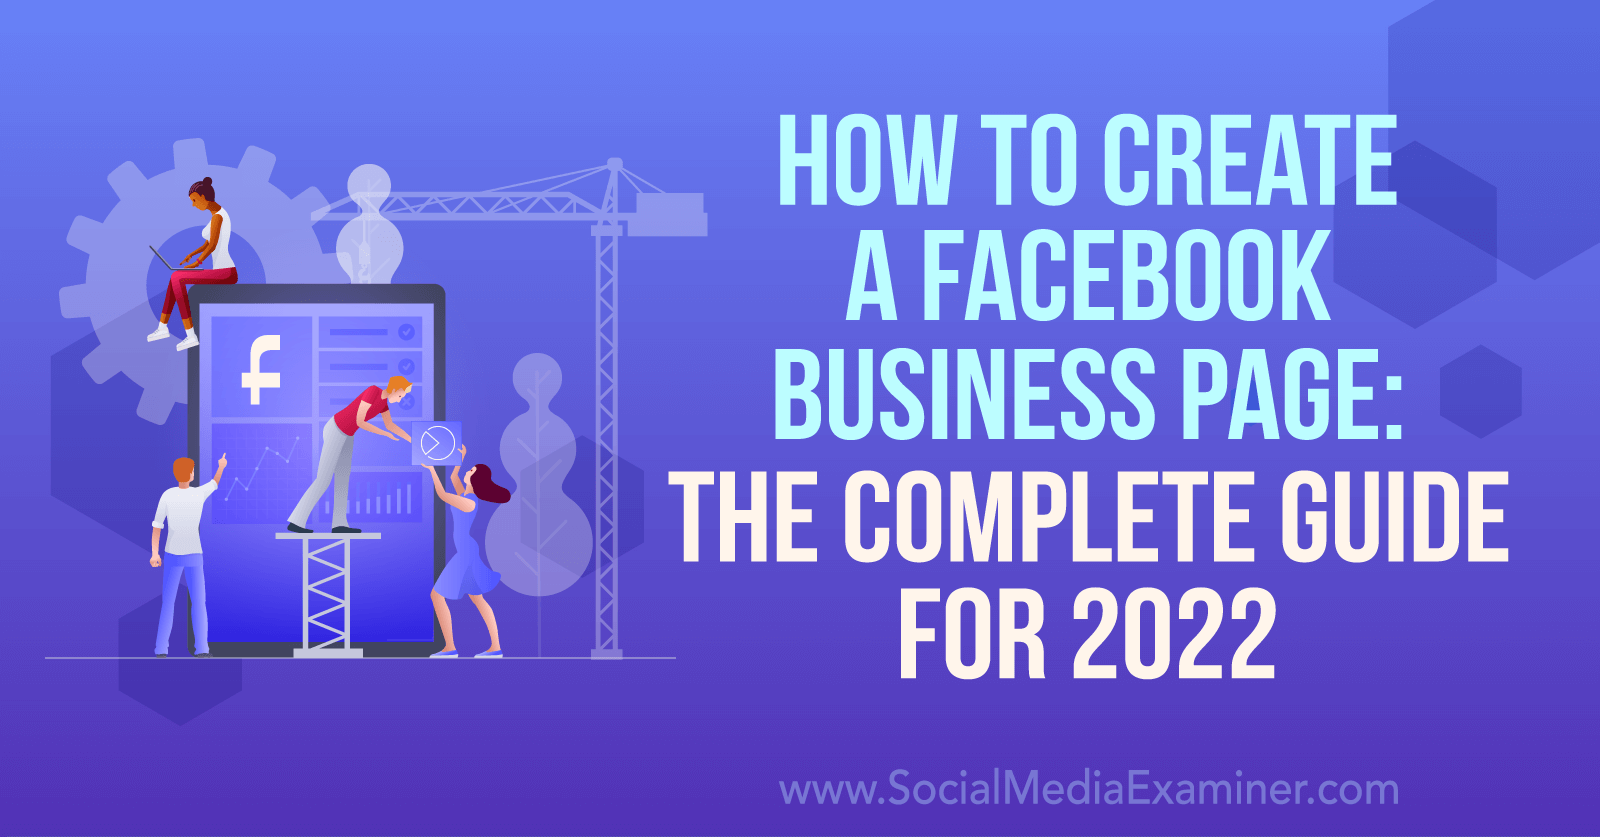 How to Create a Facebook Business Page 